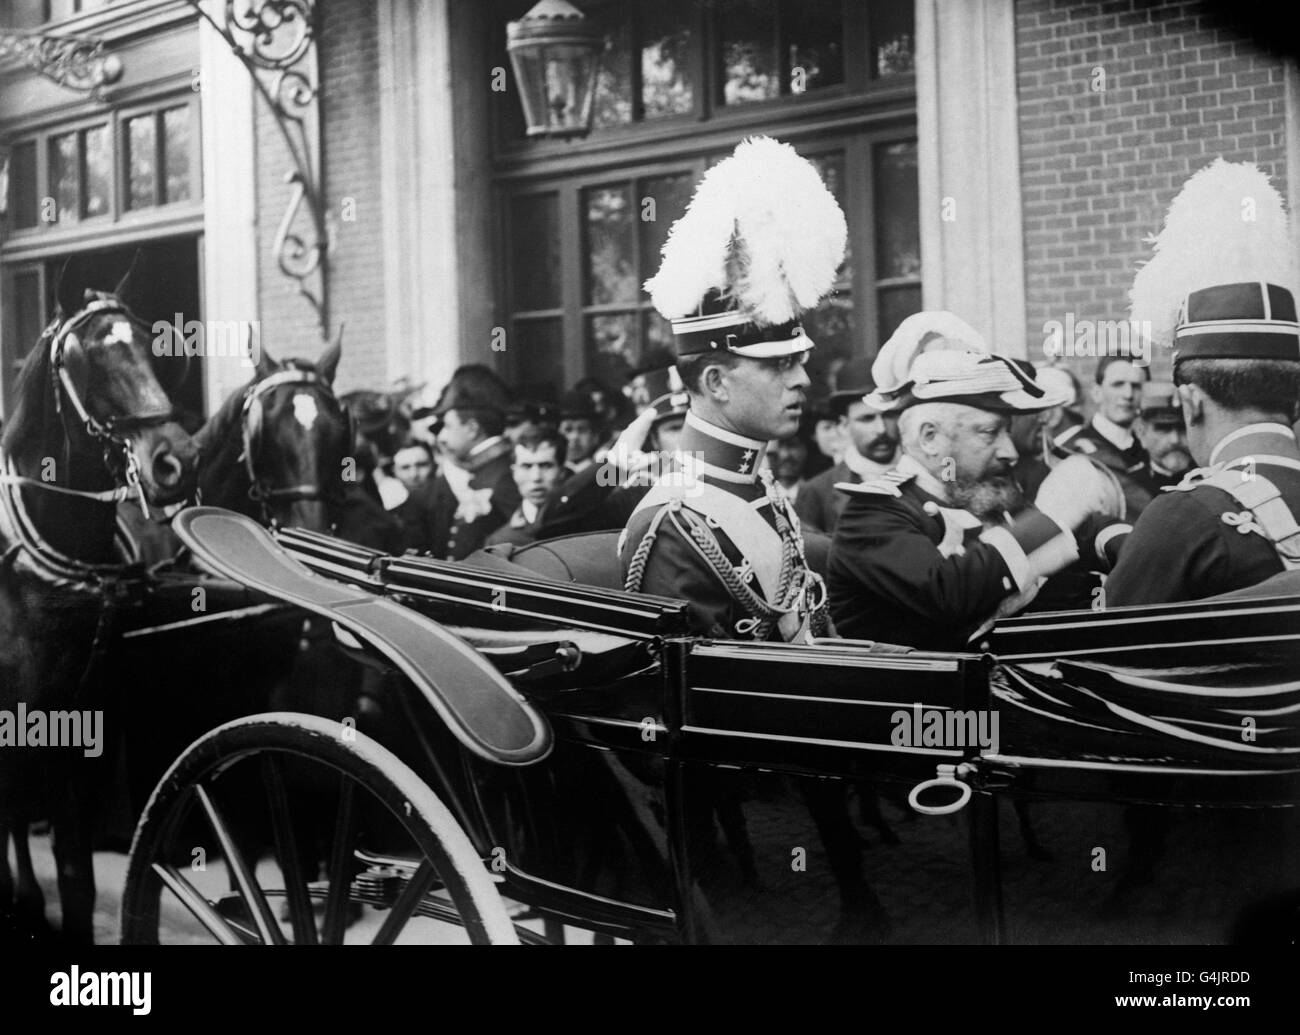 Prince Andrew of Greece outside Madrid Train Station on the occasion of King Alfonso XIII's wedding to Princess Victoria Eugenie of Battenberg. Stock Photo